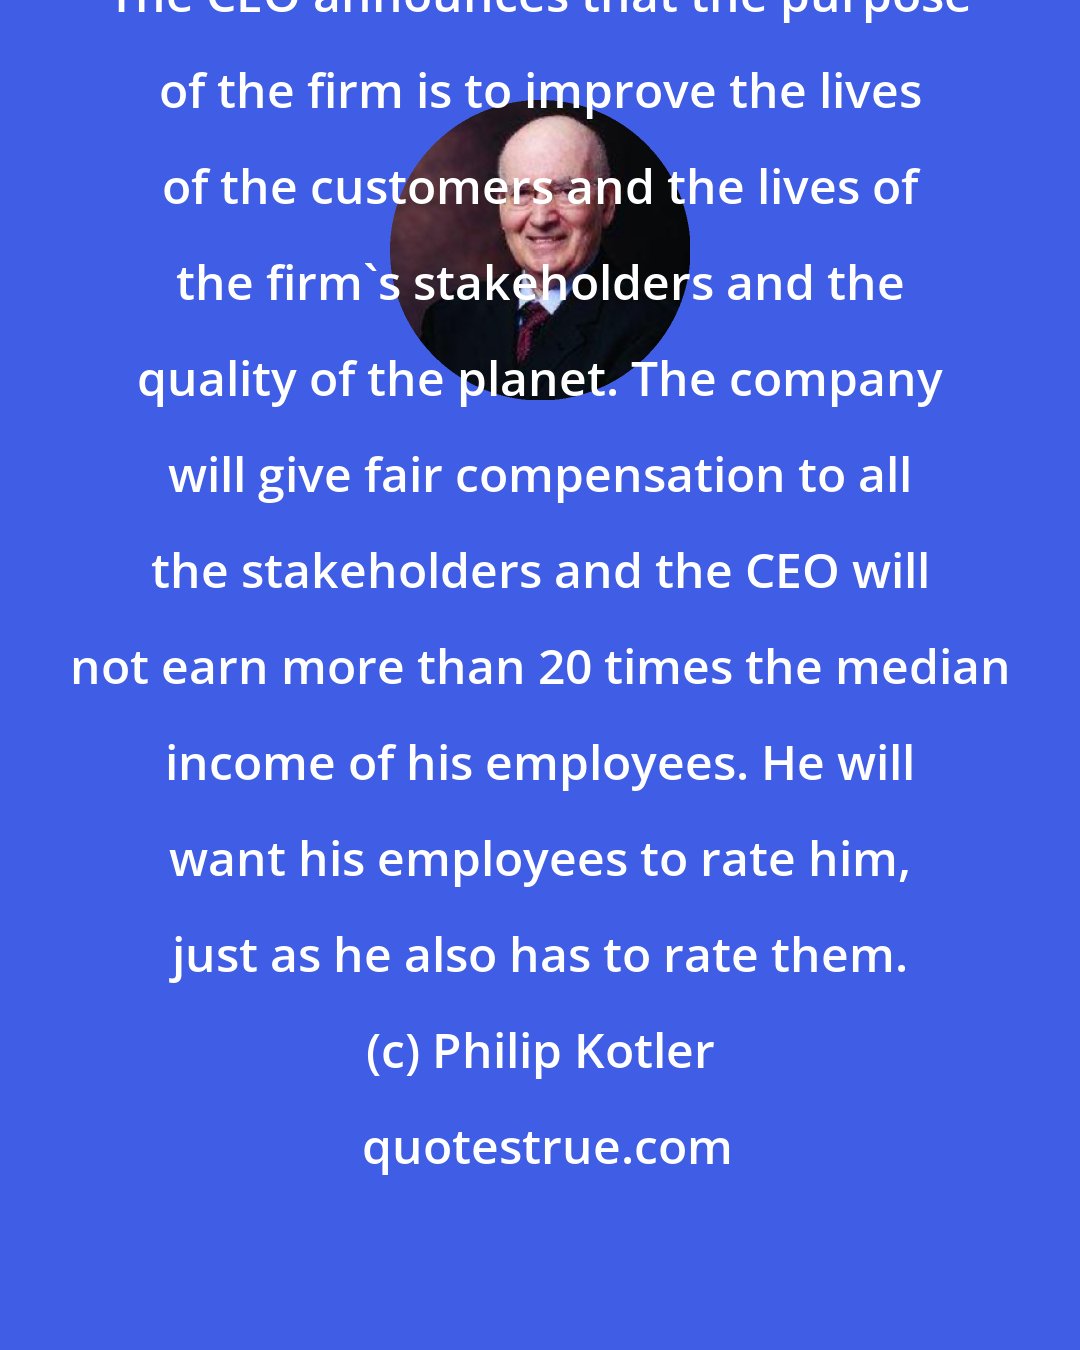 Philip Kotler: The CEO announces that the purpose of the firm is to improve the lives of the customers and the lives of the firm's stakeholders and the quality of the planet. The company will give fair compensation to all the stakeholders and the CEO will not earn more than 20 times the median income of his employees. He will want his employees to rate him, just as he also has to rate them.